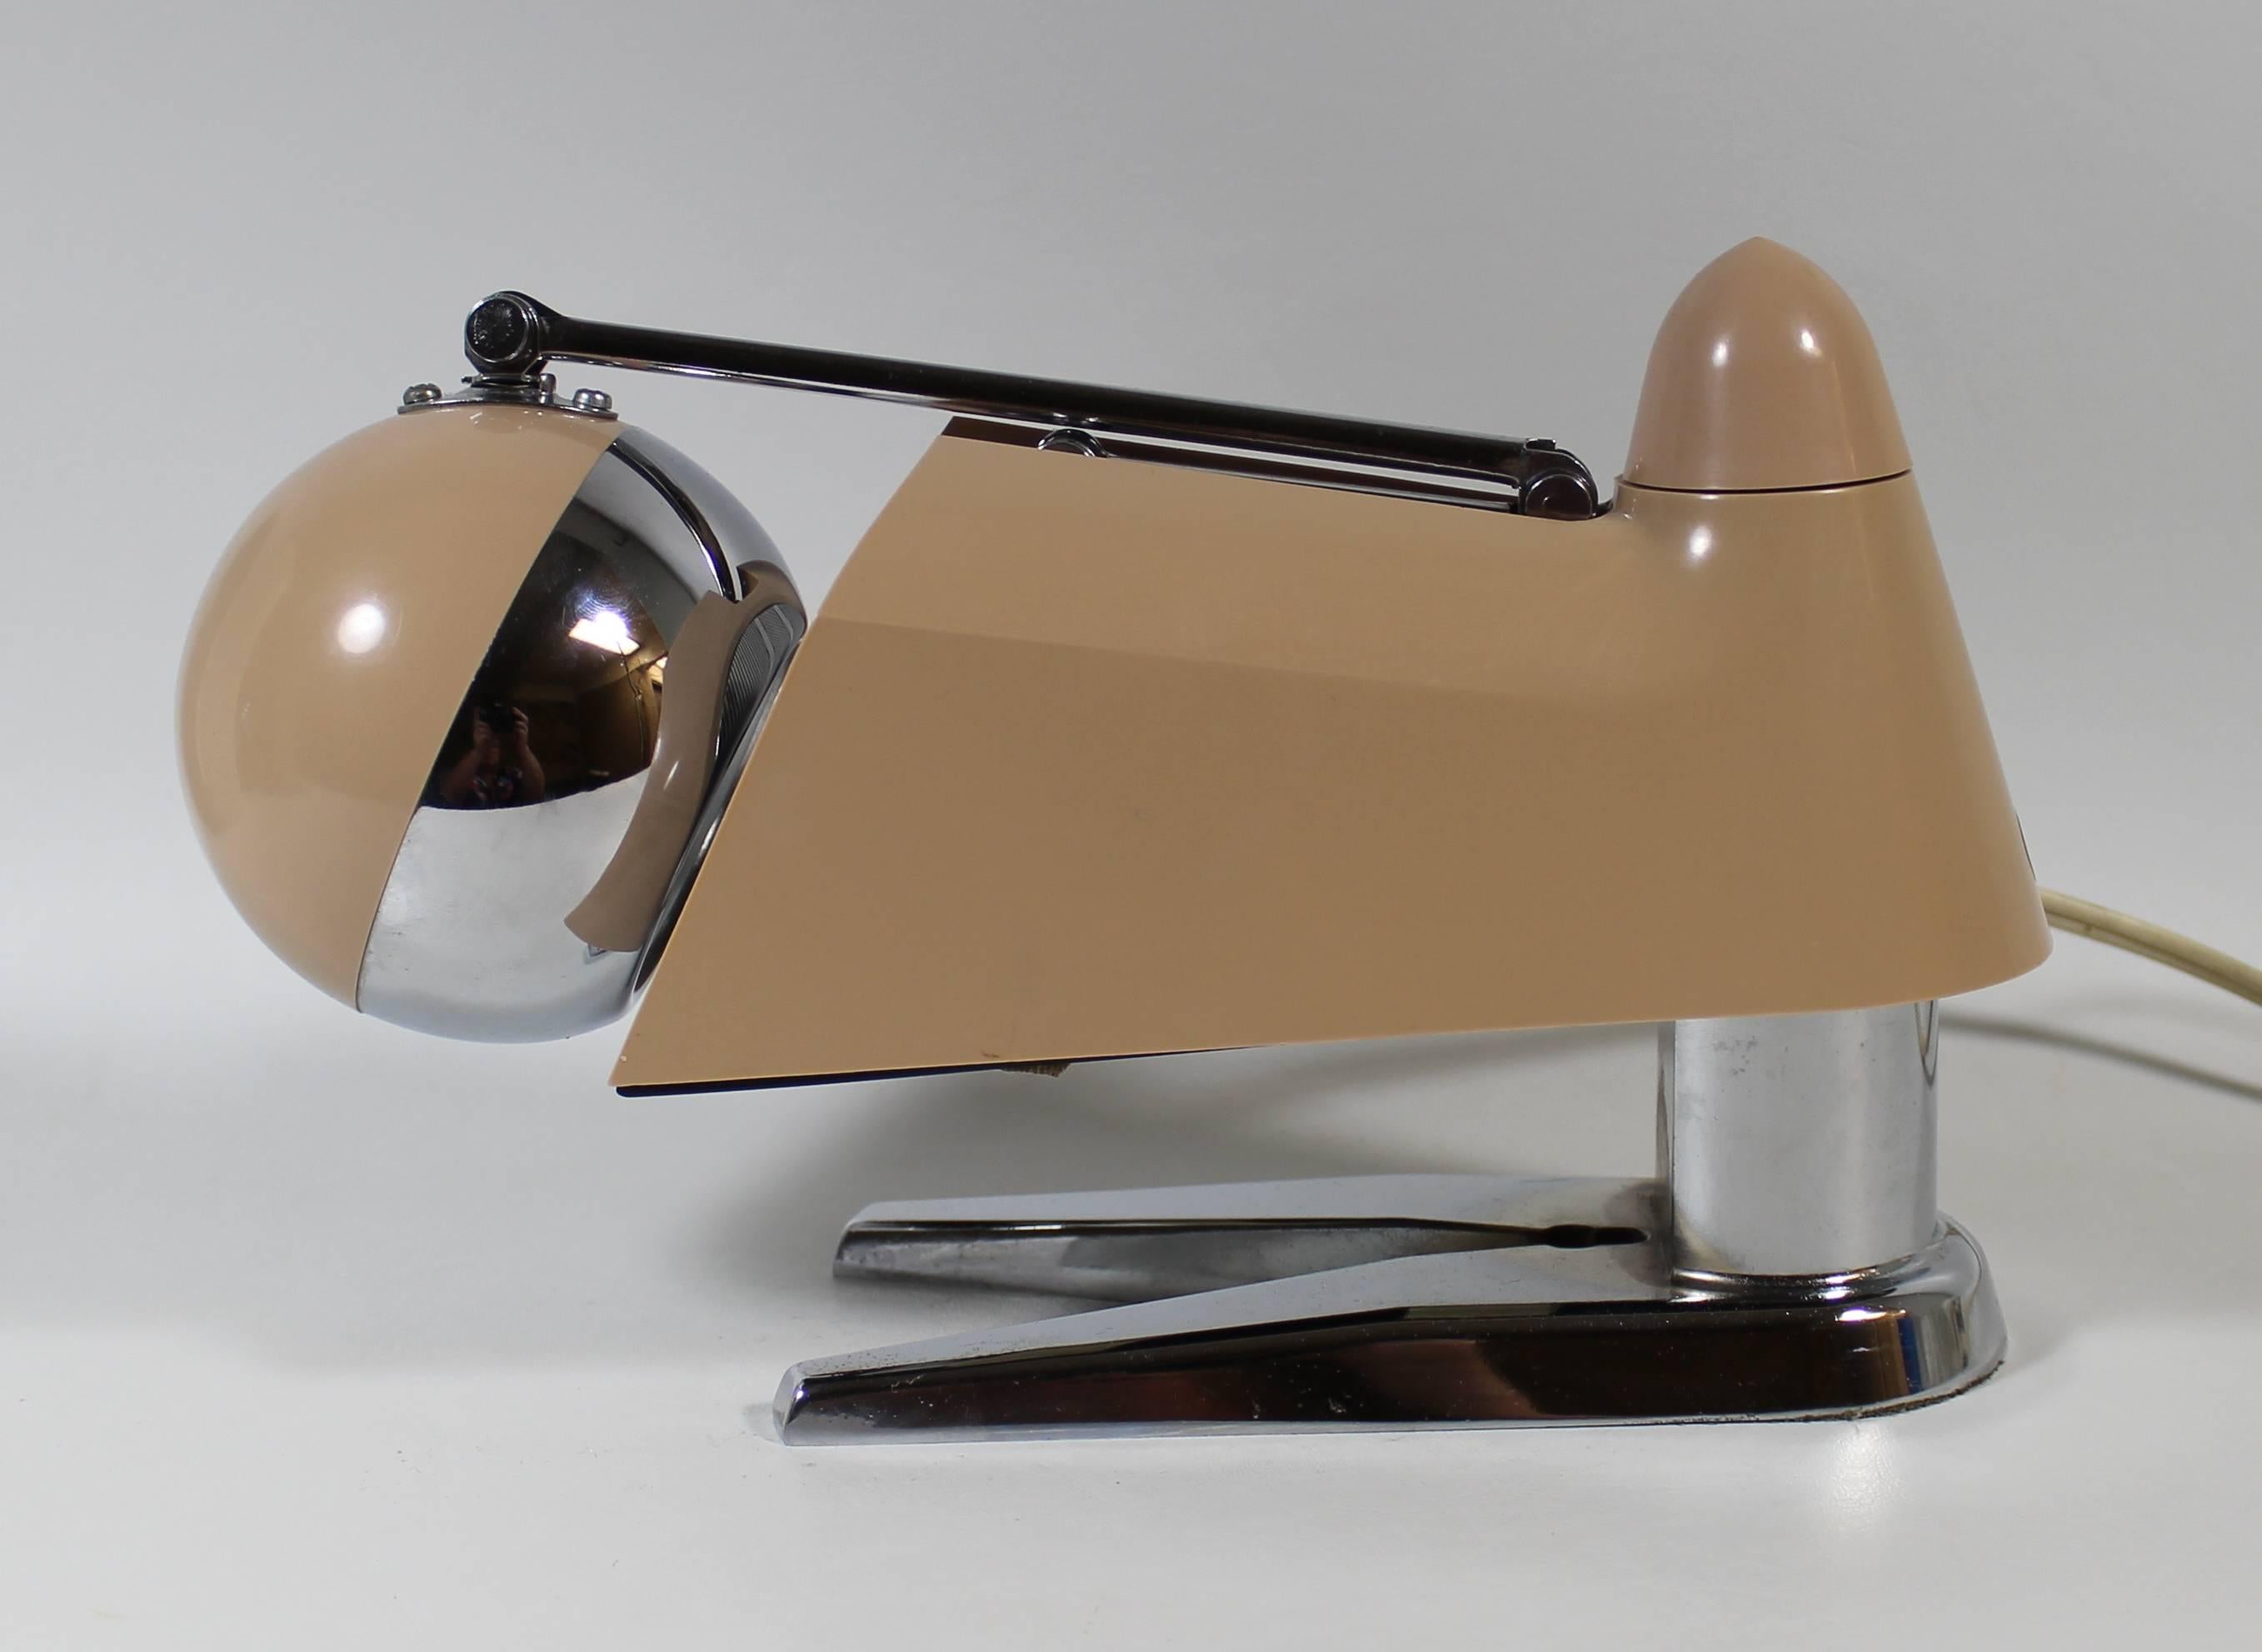 Space Age telescoping desk lamp

Hamilton Industries desk or table lamp. This adjustable lamp was made in Japan for Hamilton Industries, Chicago, Illinois. It has a hi and low option which controls the lights brightness. The arm telescopes